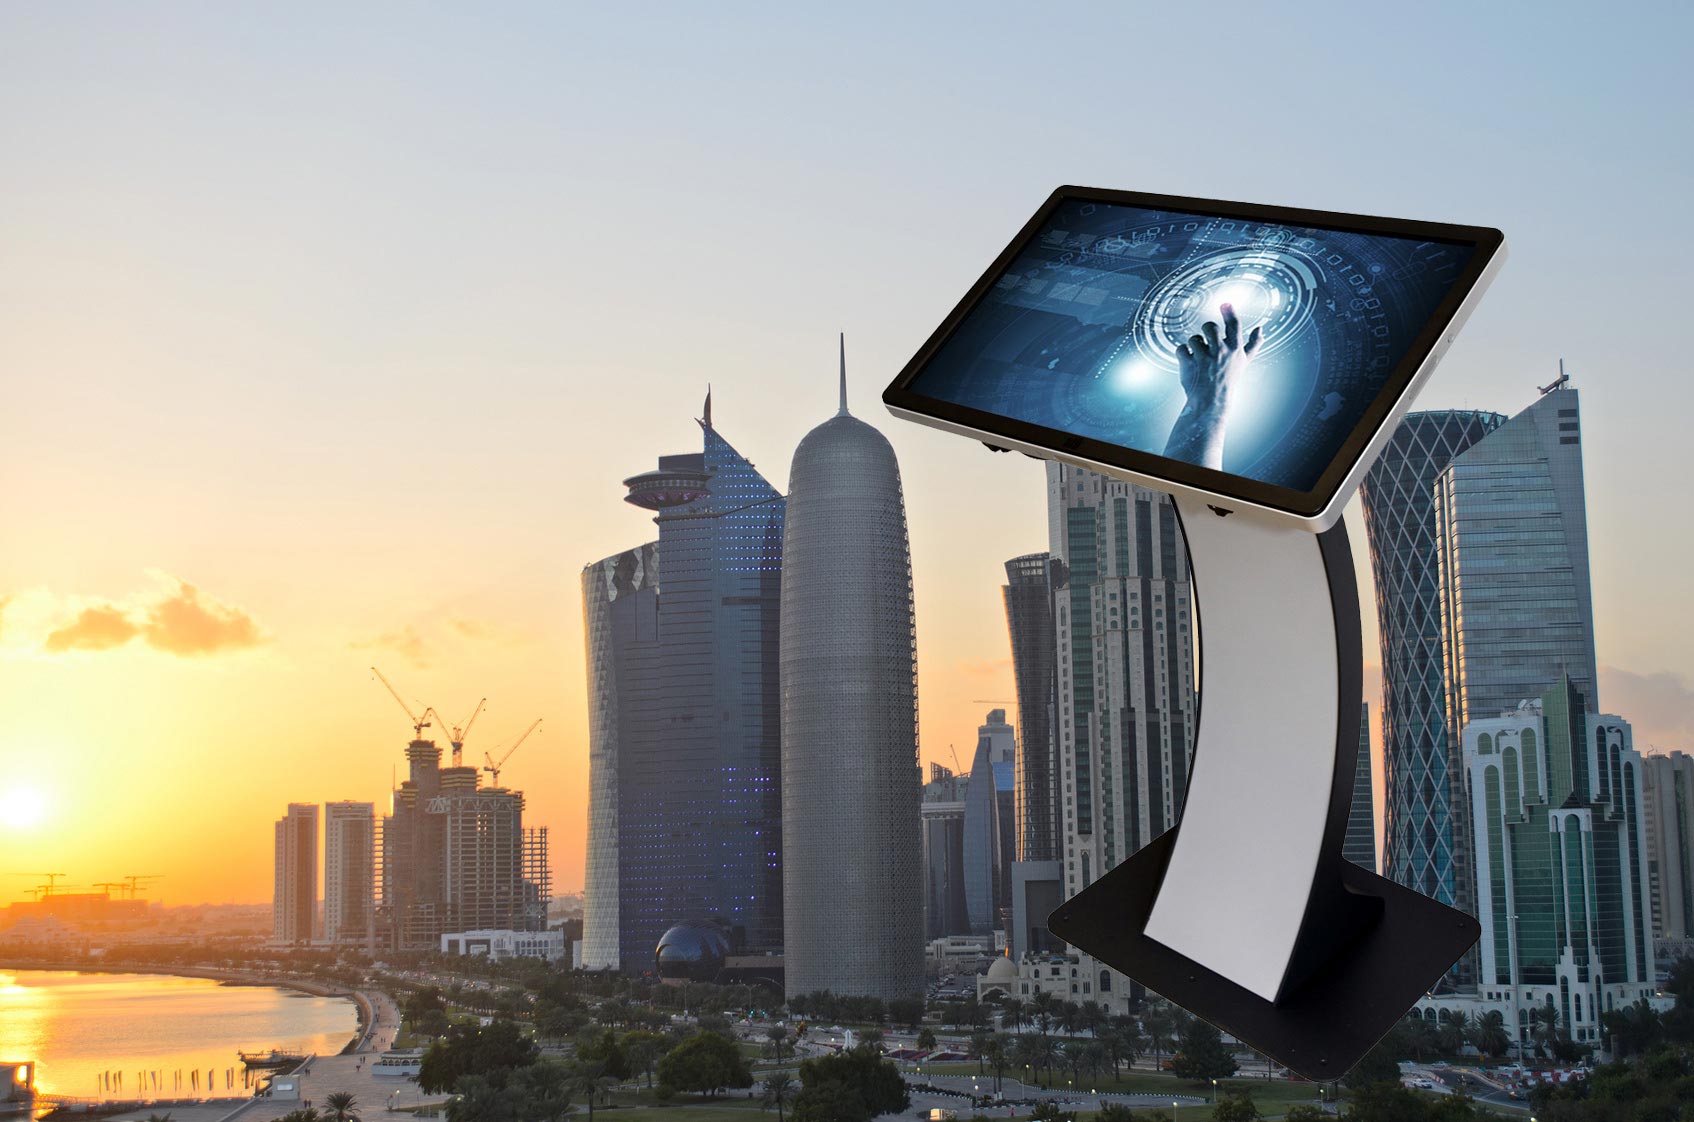 WES major project in Qatar. "easy pc stand" All-in-one solution - kiosk terminal, info terminal and monitor stand in one.